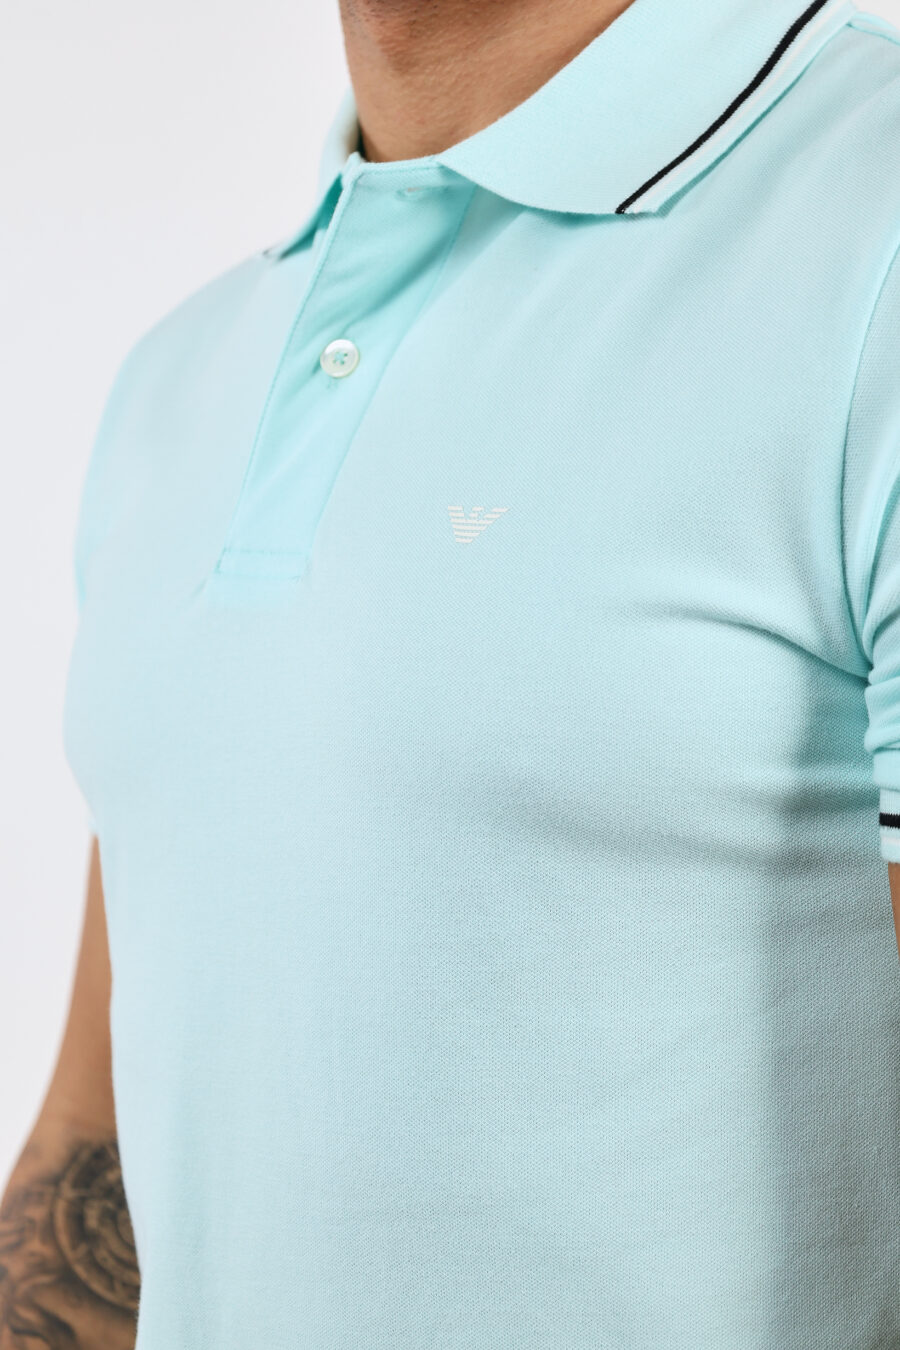 Light blue knitted polo shirt with striped collar and mini eagle logo - BLS Fashion 39